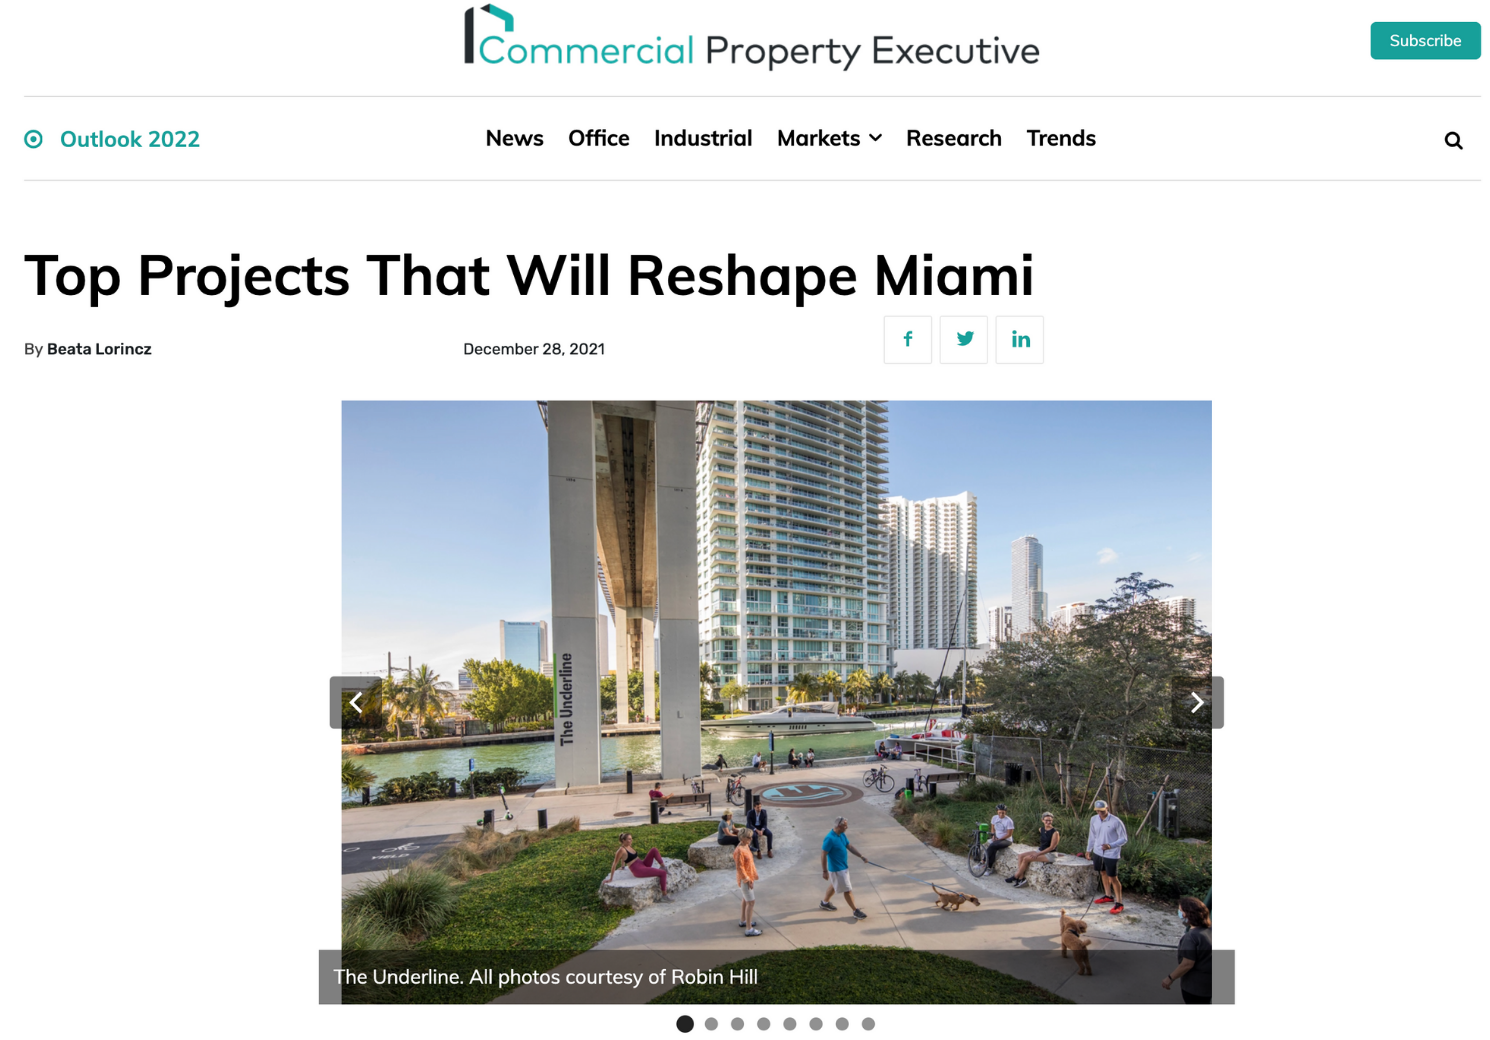 Commercial Property Executive "Top Projects That Will Reshape Miami